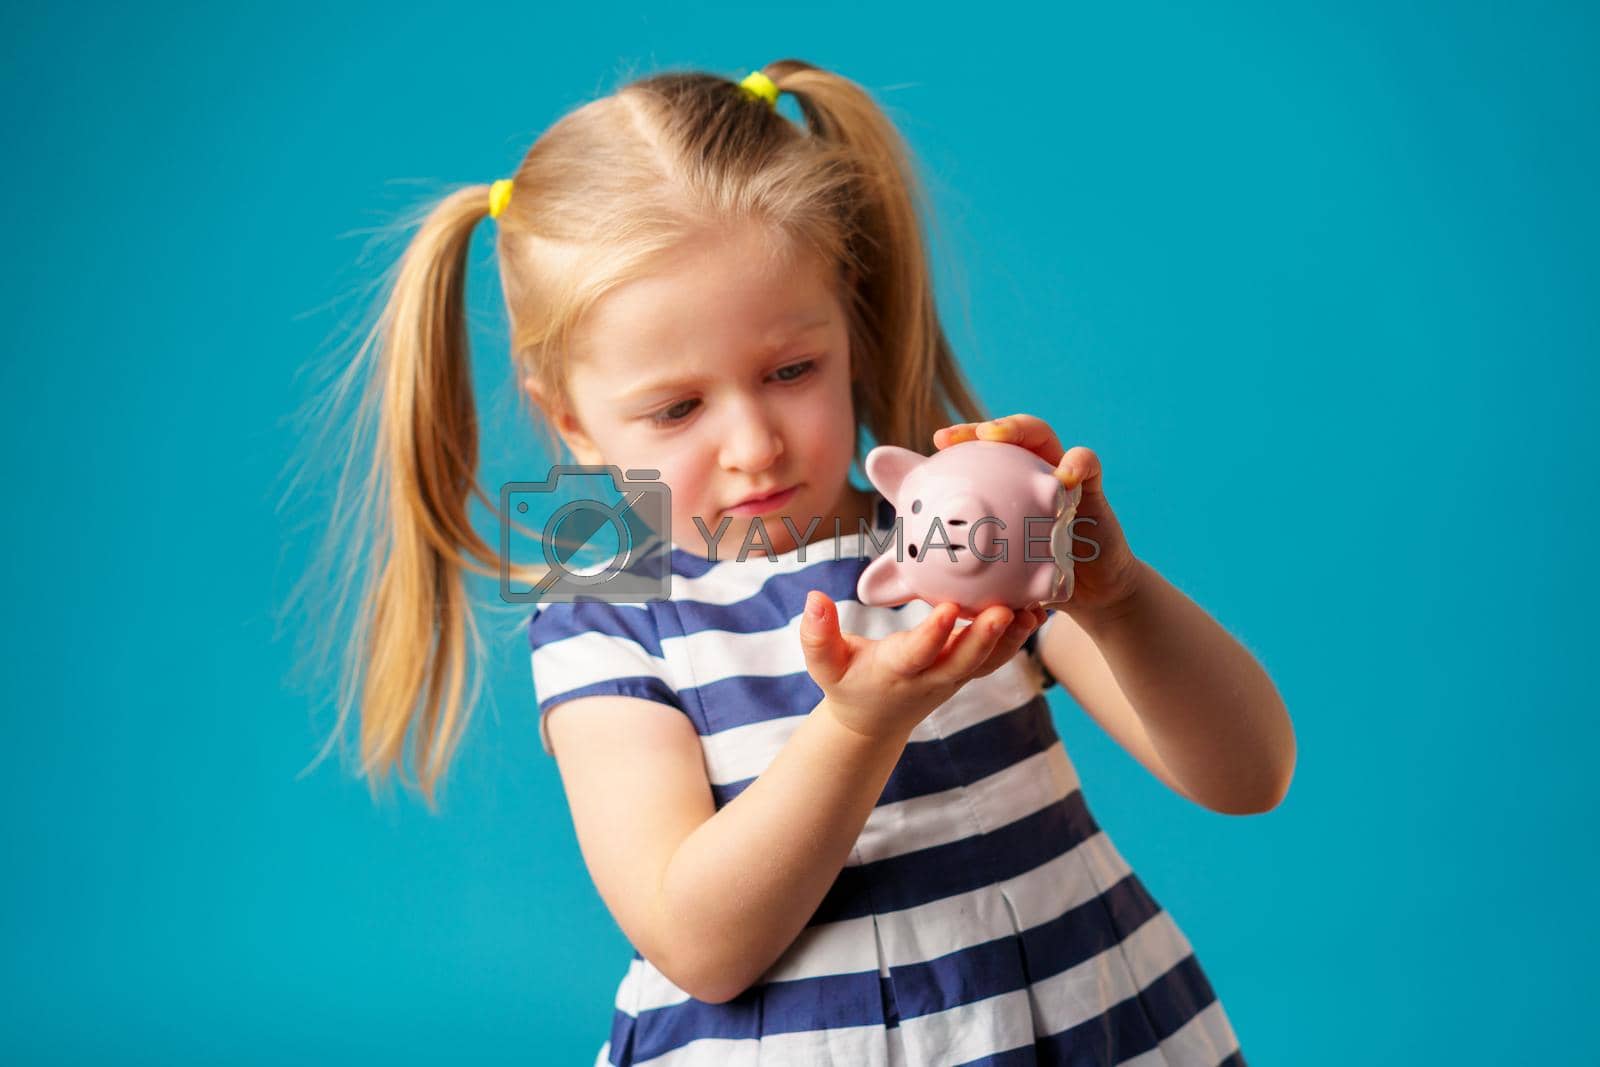 Royalty free image of Funny little girl with piggy bank moneybox portrait by Fabrikasimf